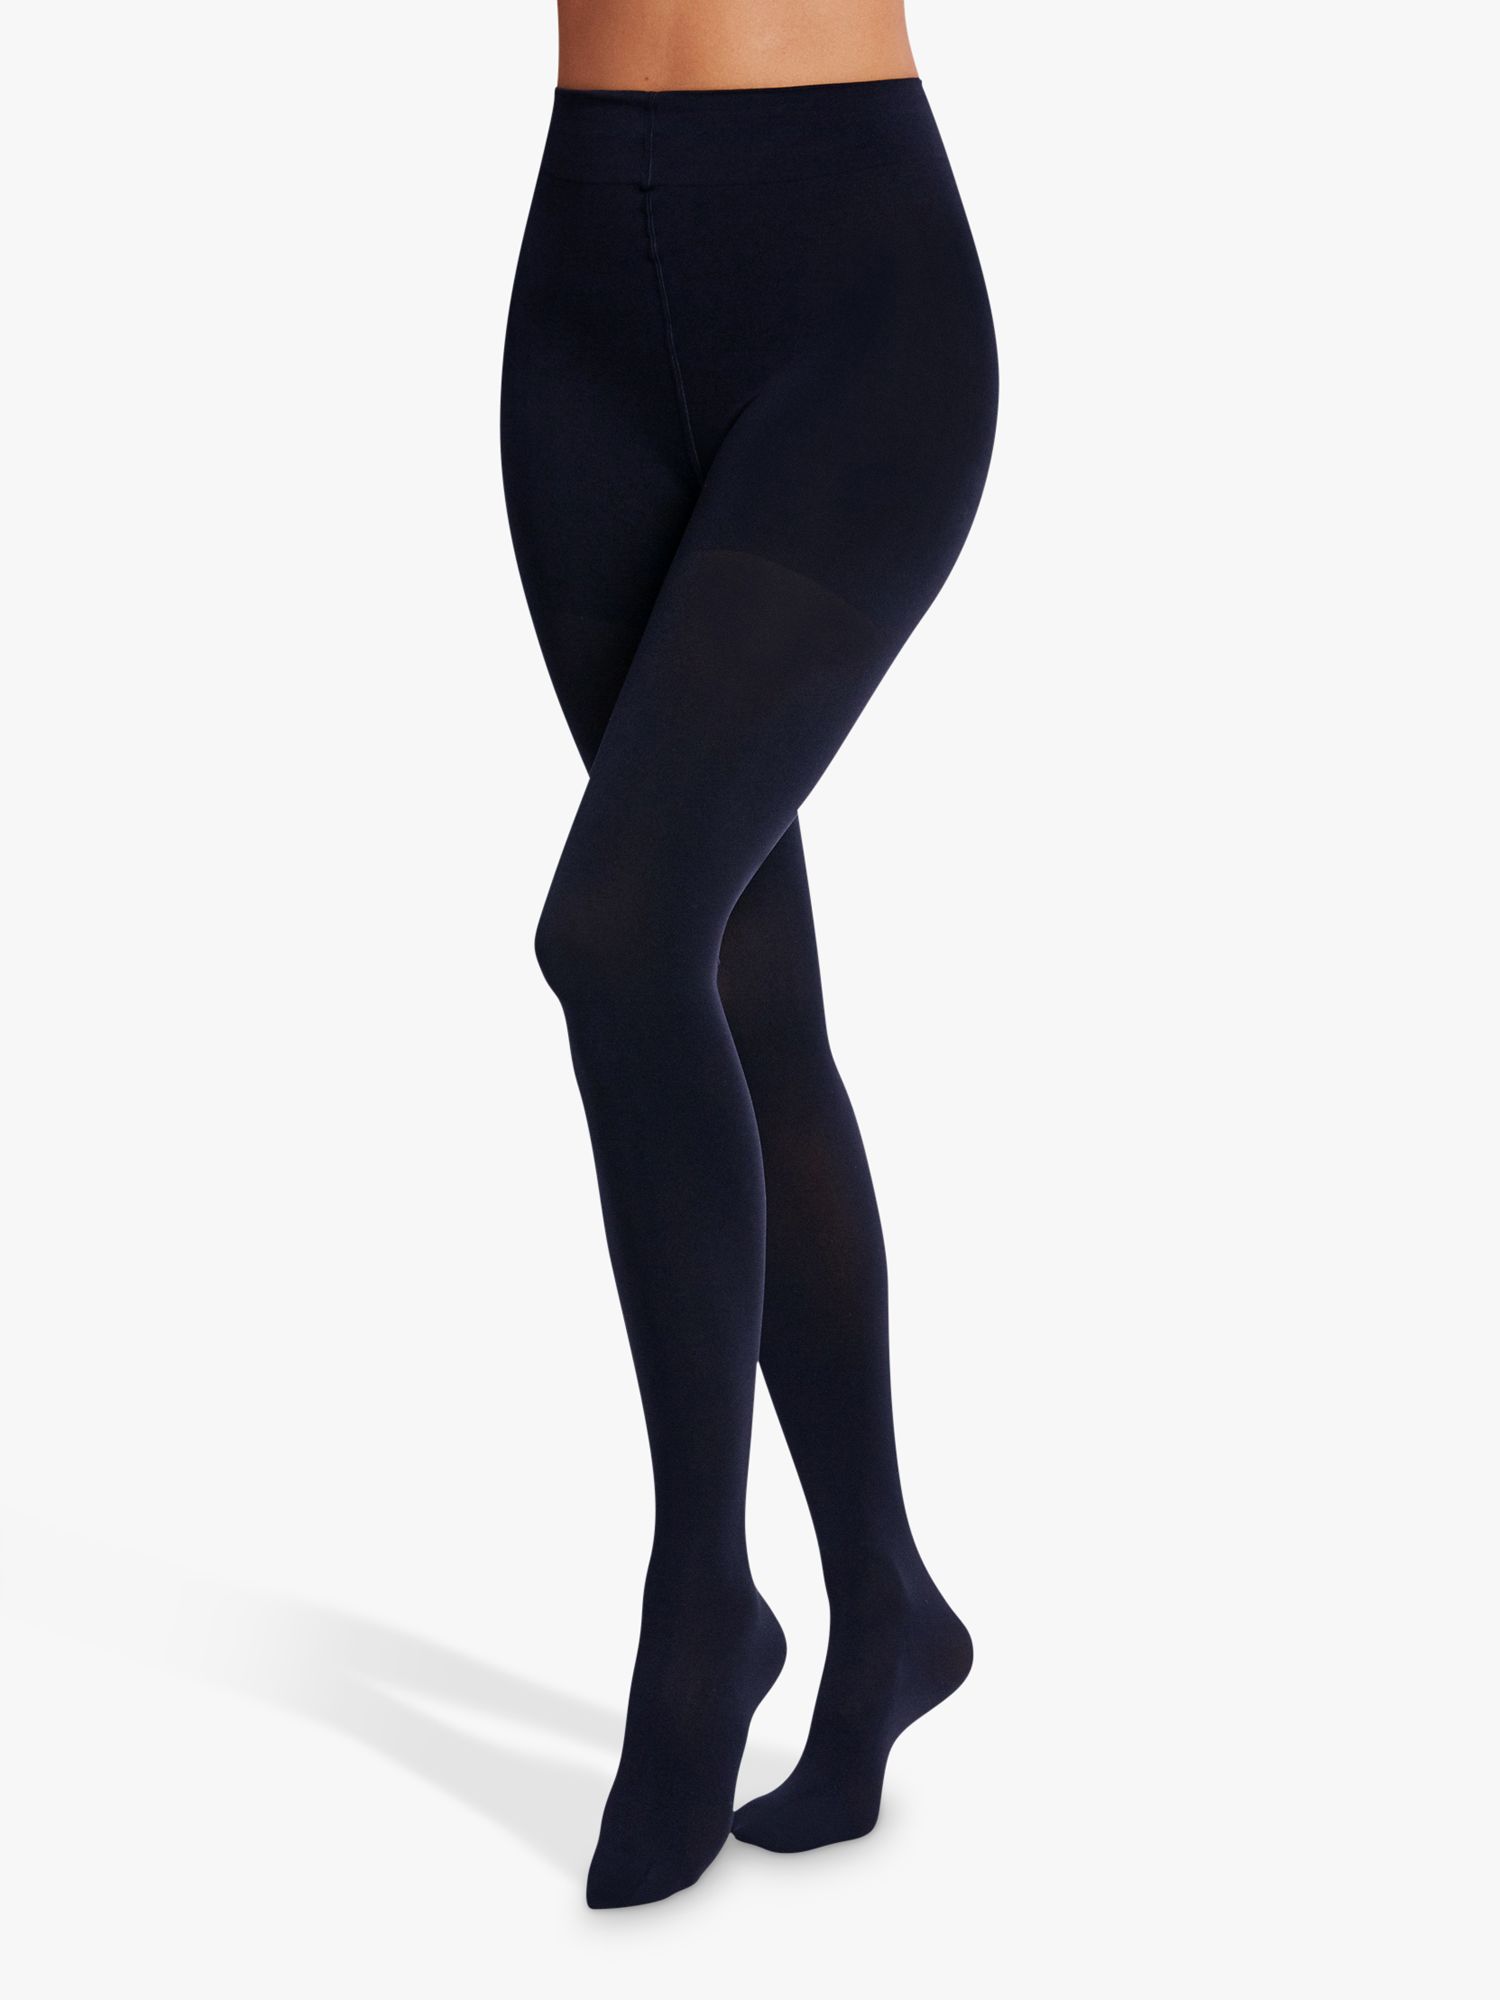 WOLFORD MAT OPAQUE 80 TIGHTS, Black Women's Socks & Tights